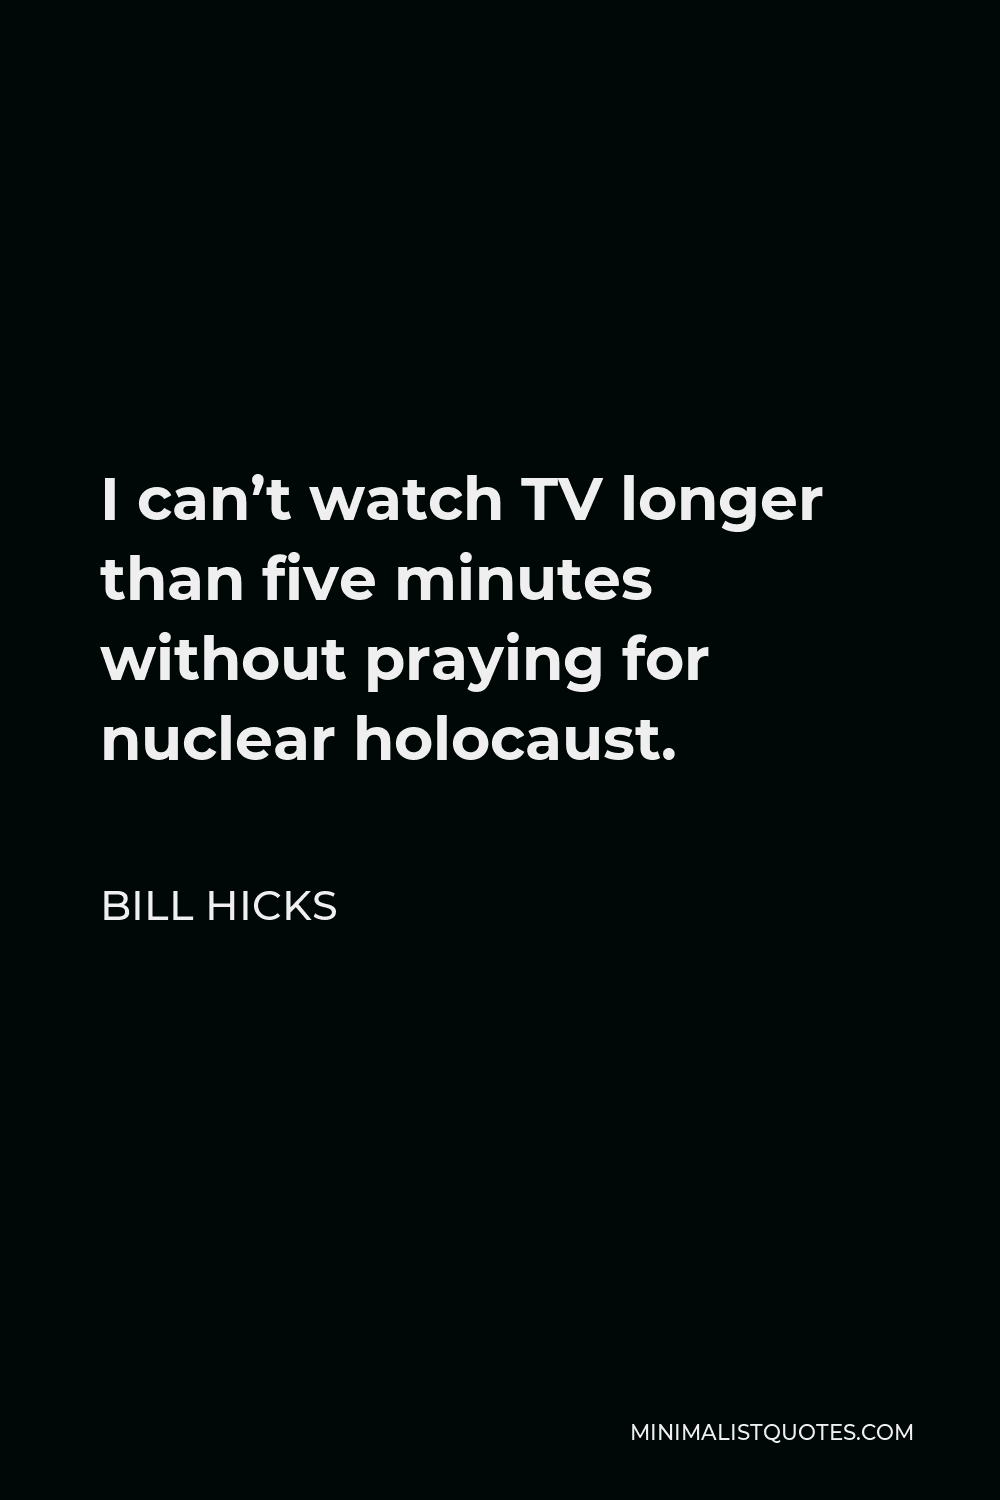 Bill Hicks Quote - I can’t watch TV longer than five minutes without praying for nuclear holocaust.